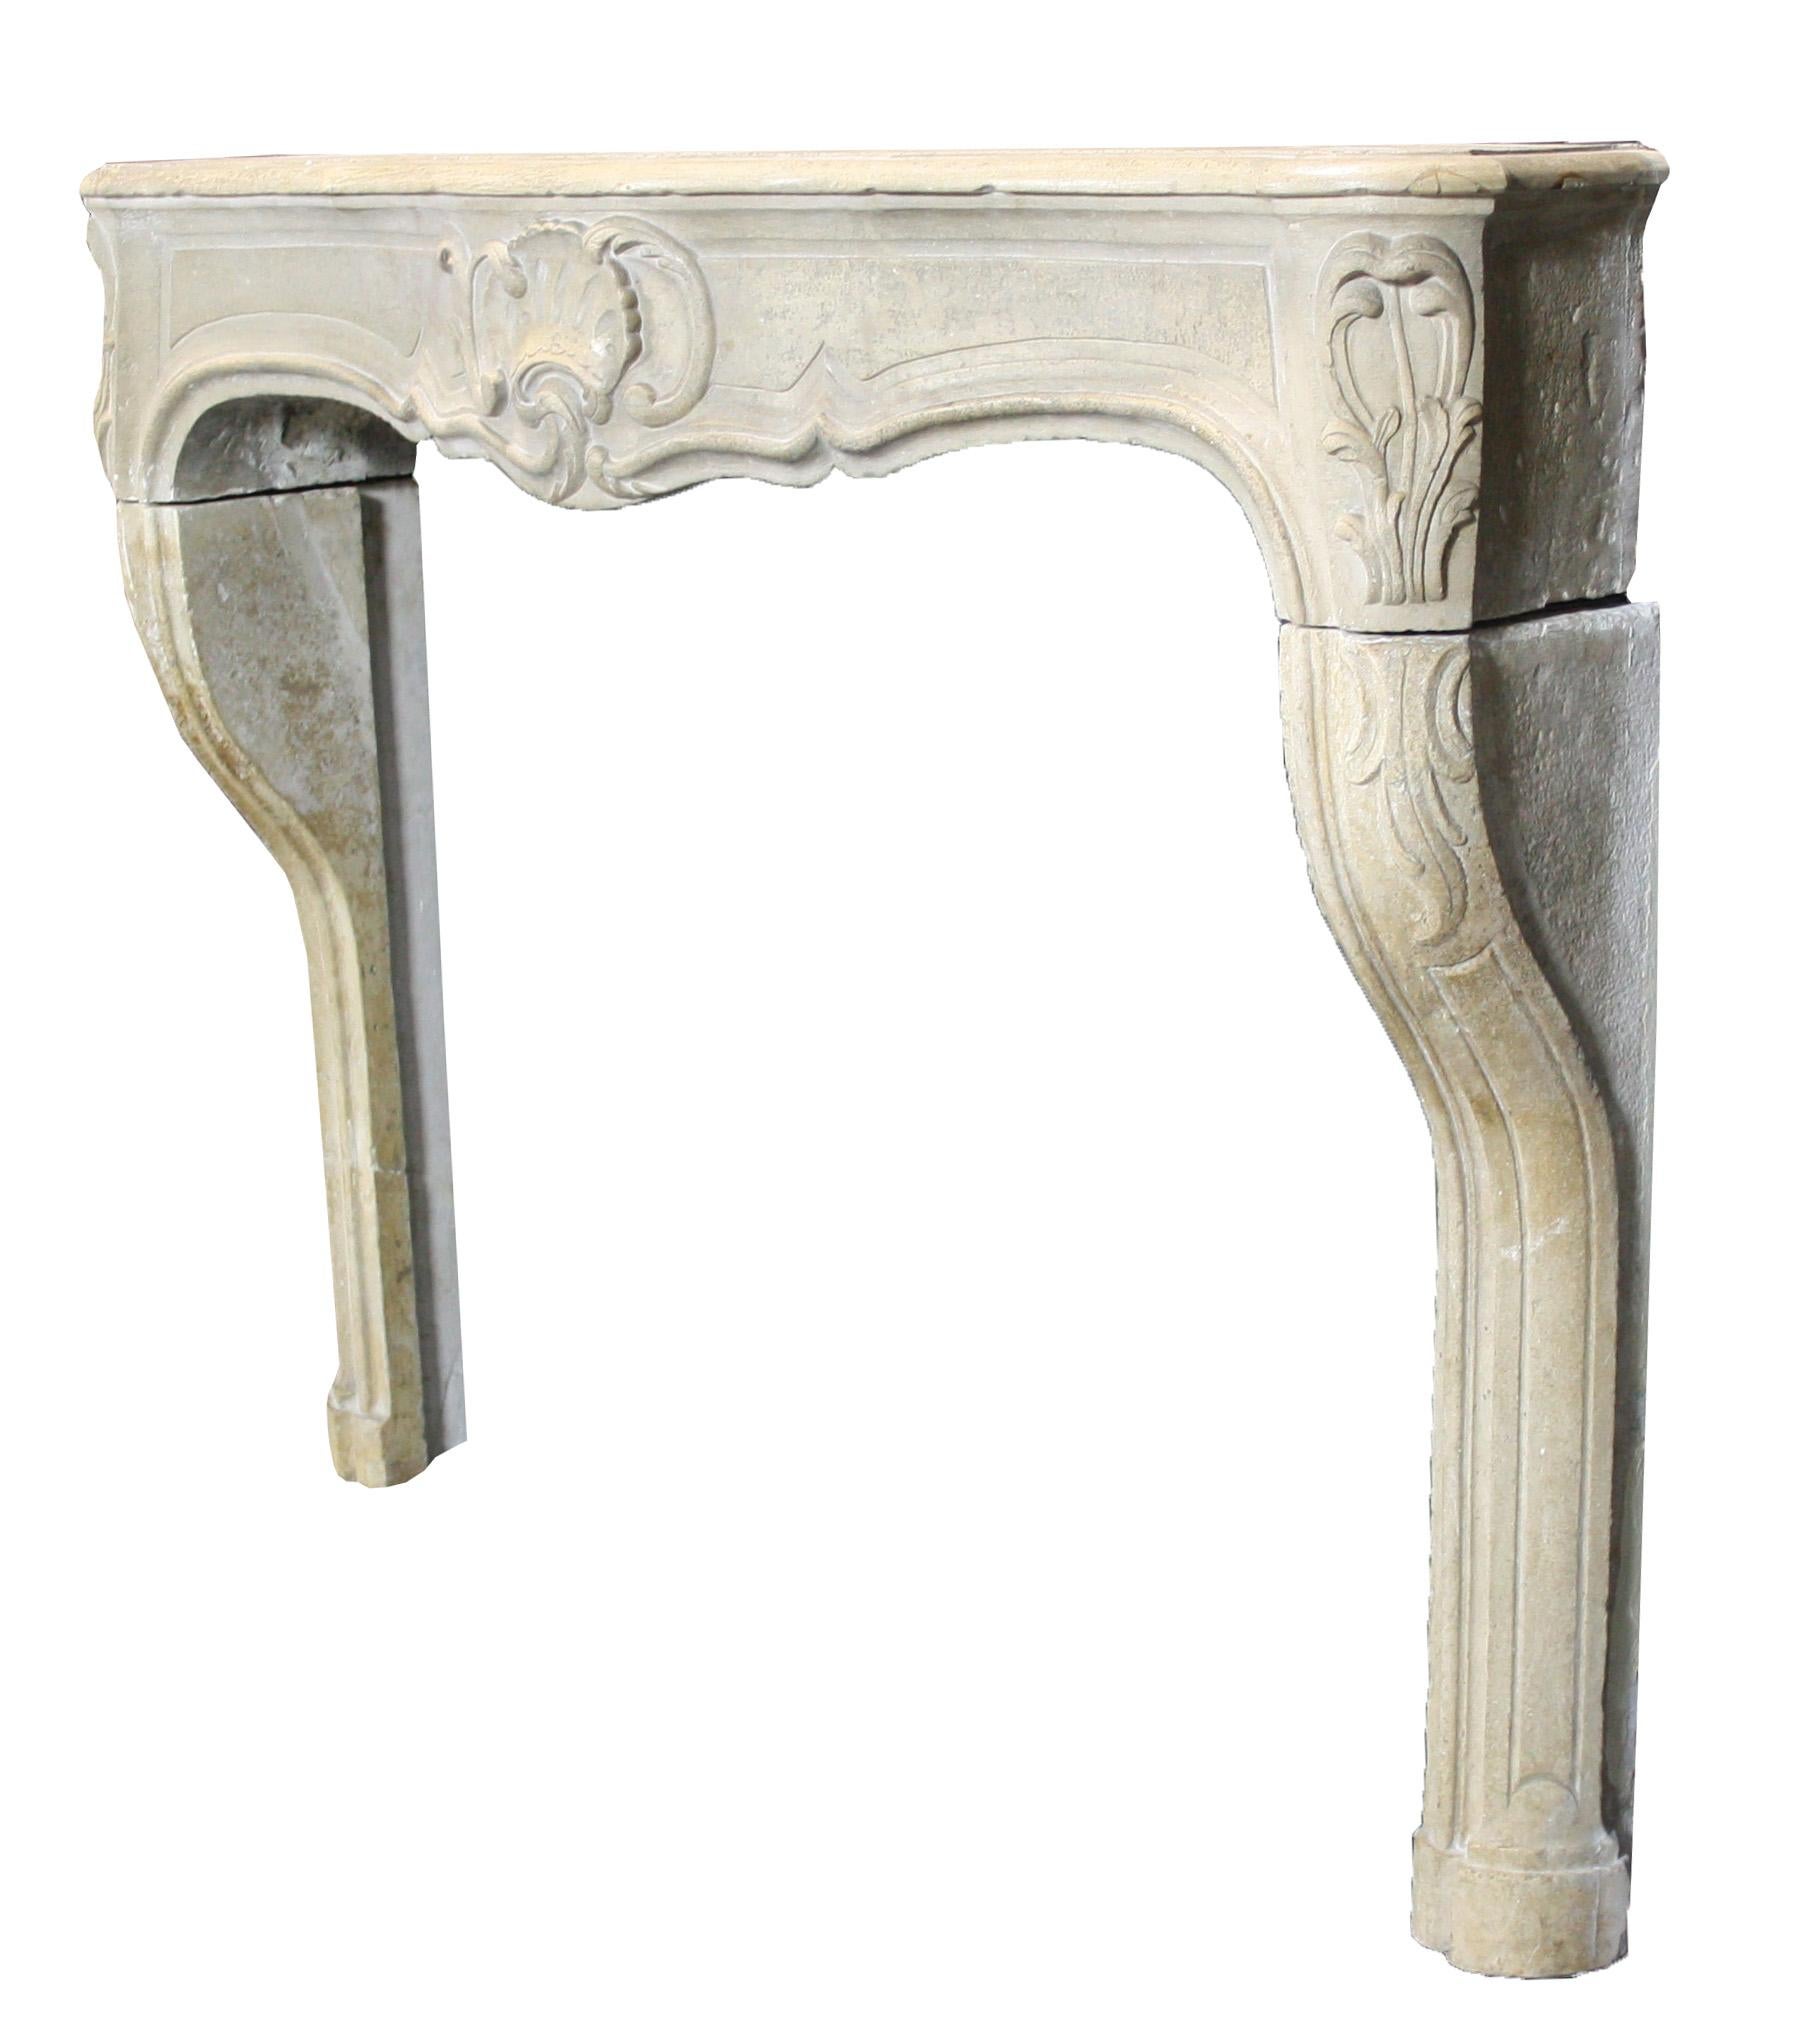 A reclaimed French Bourgogne stone fire surround with panelled frieze, the center carved with foliage and shell.

Opening height 91 cm

Opening with 101.5 cm.